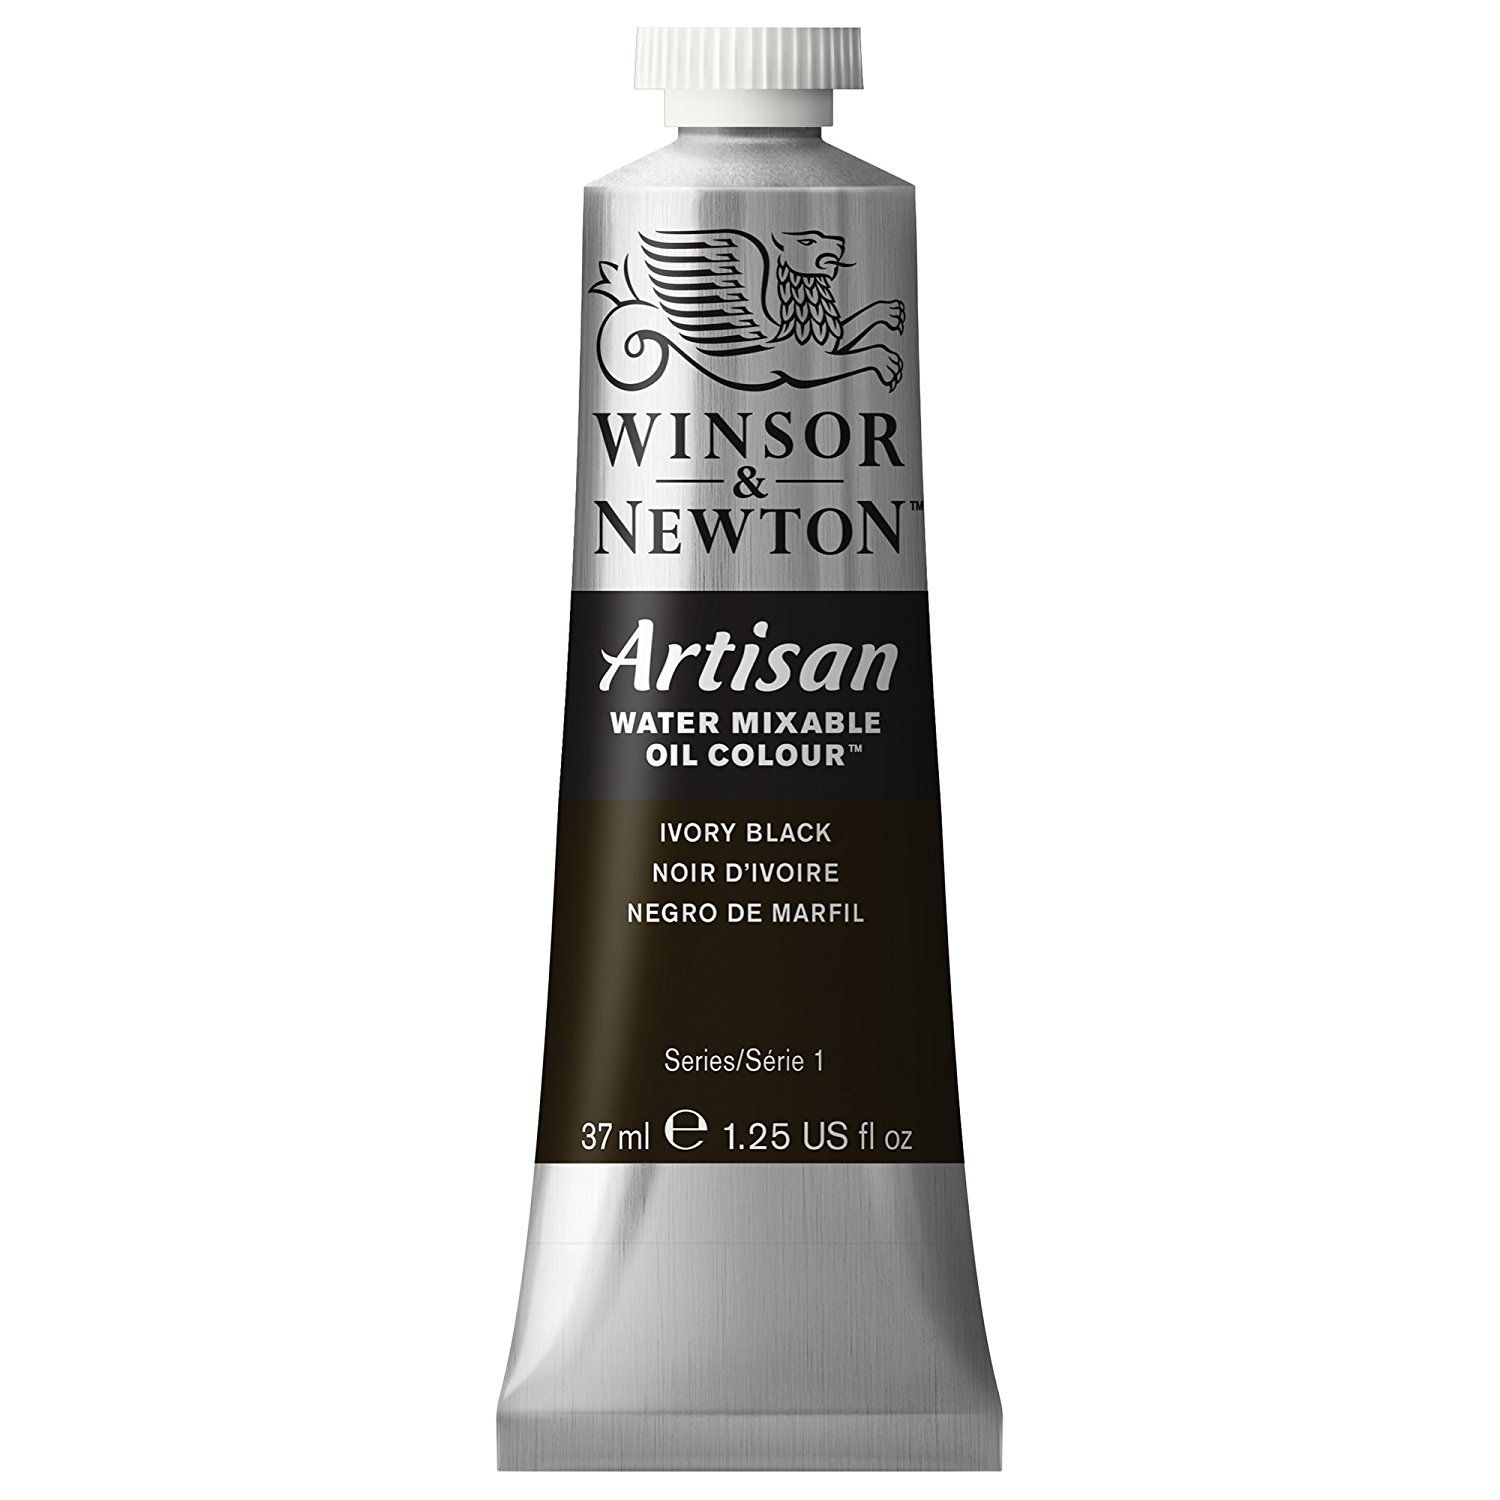 Artisan Water Mixable Oil - Ivory Black 37ml